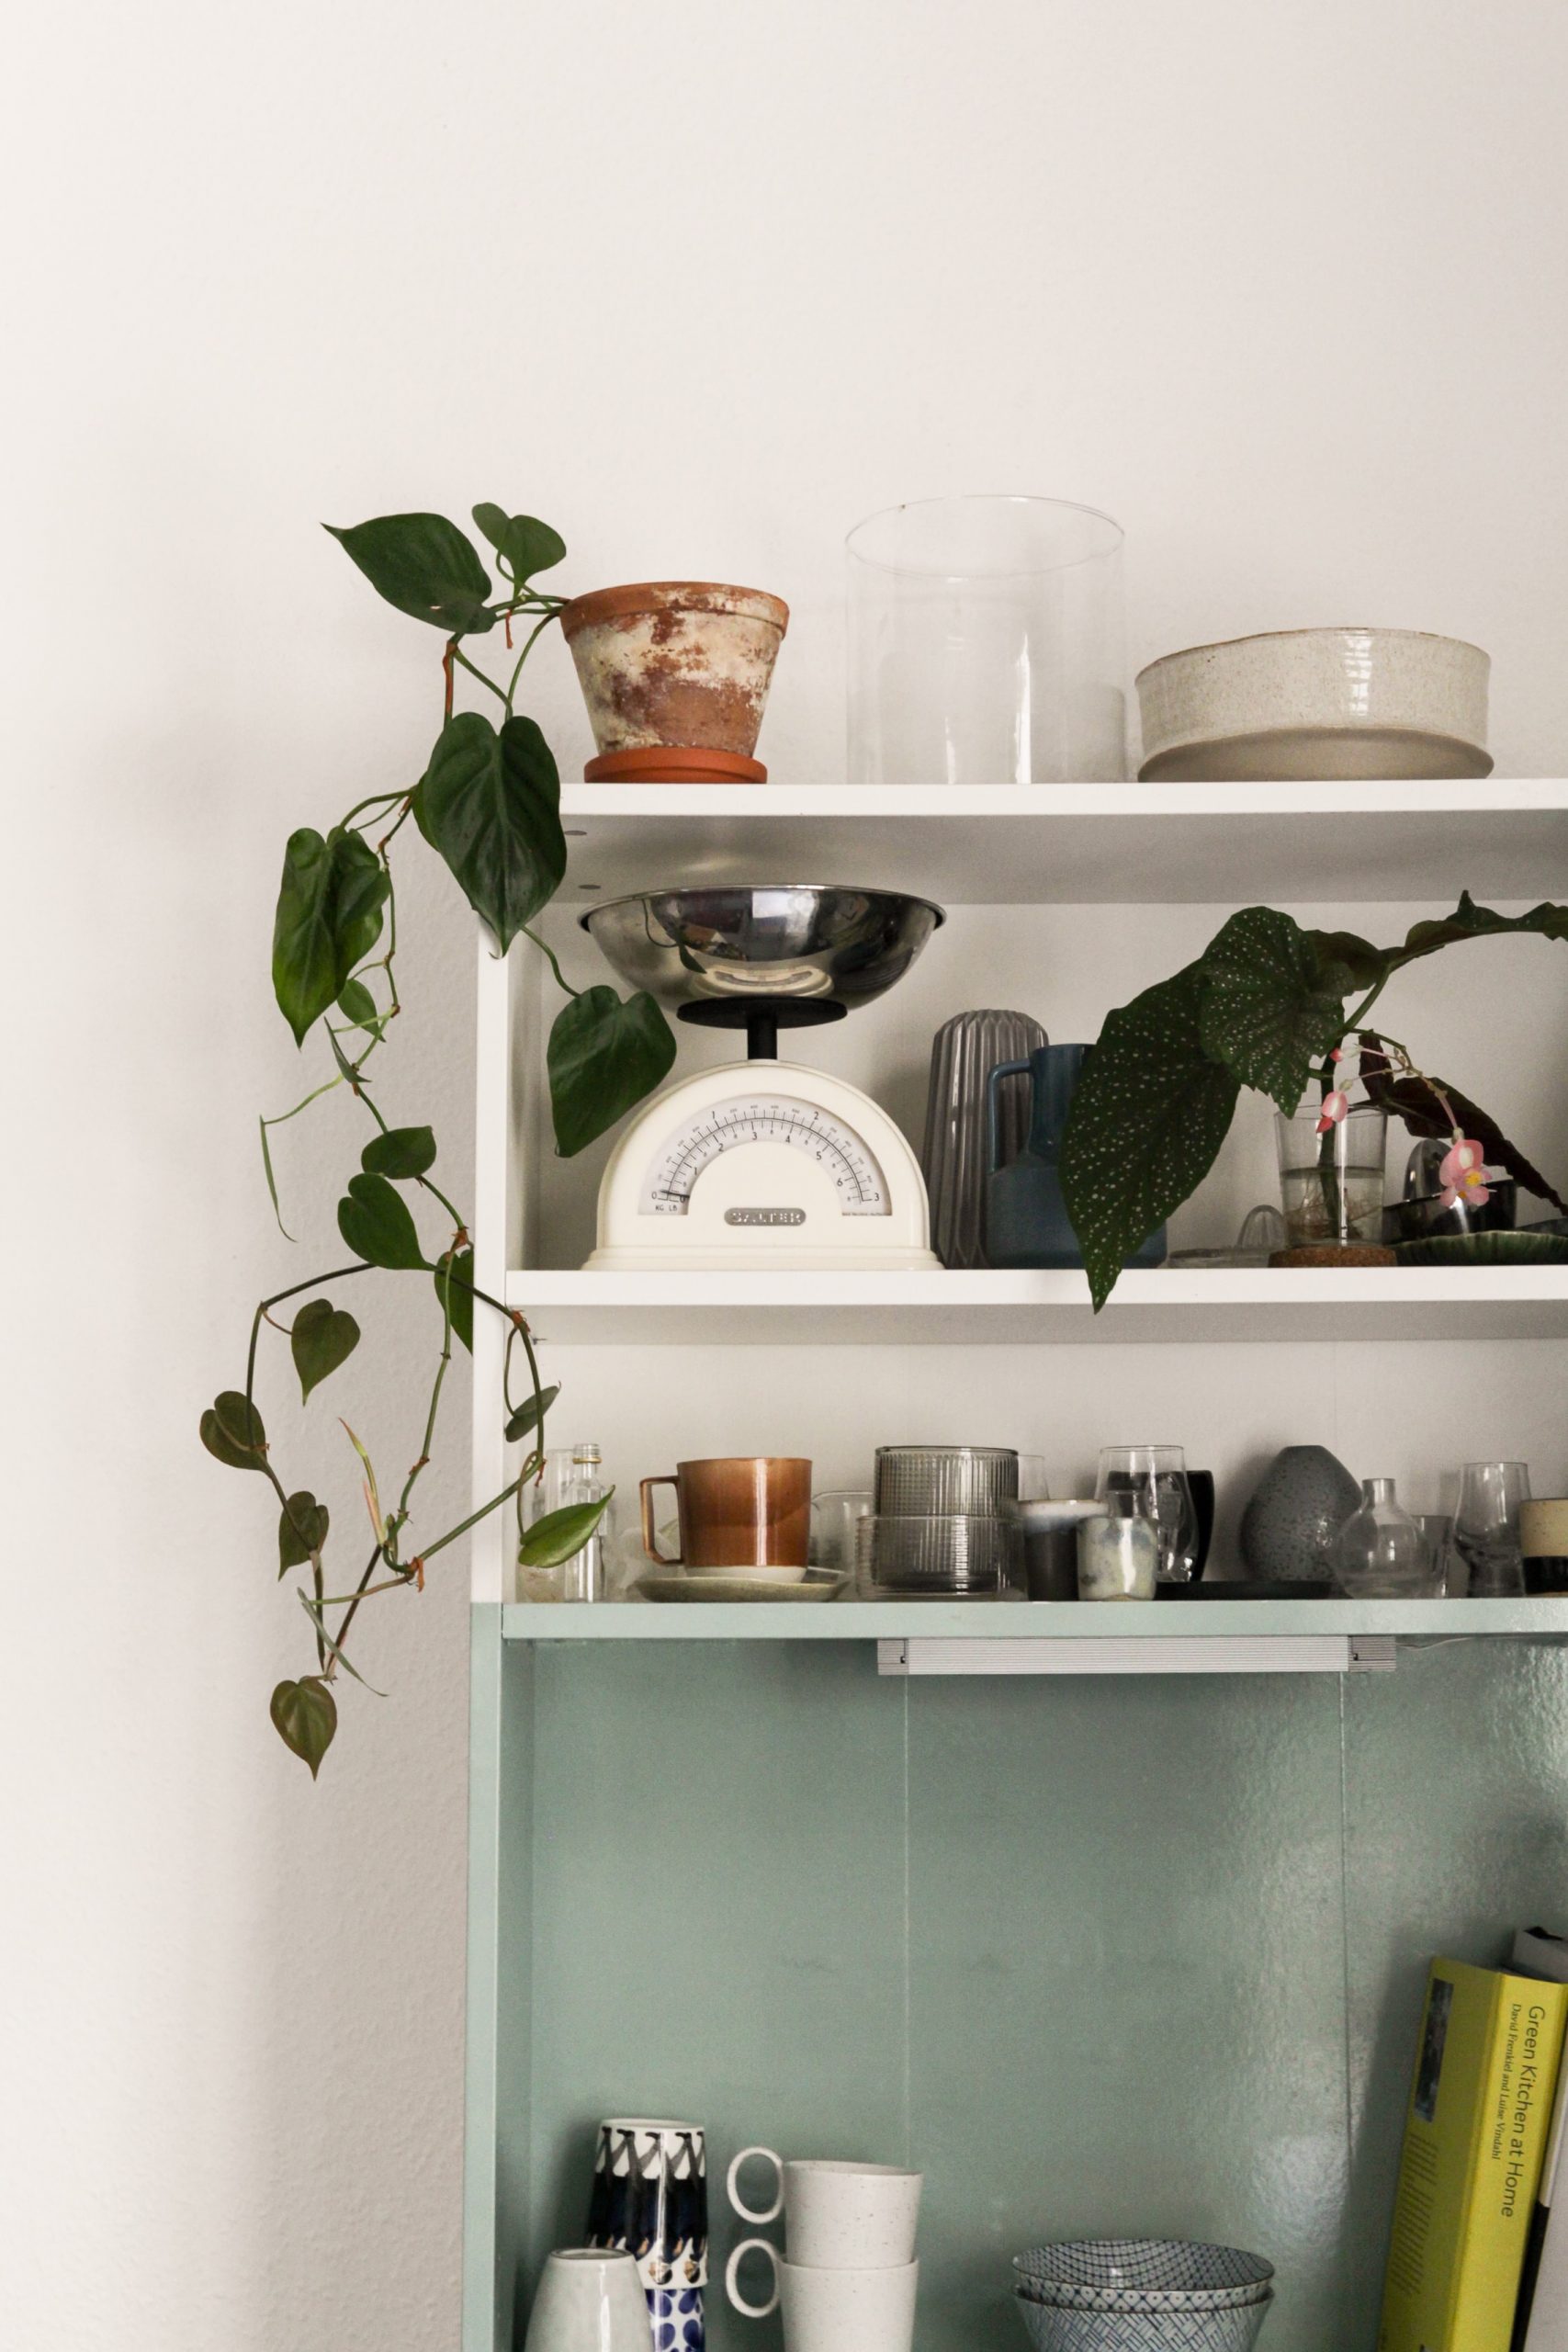 White shelving holding an assortment of kitchen wares and appliances